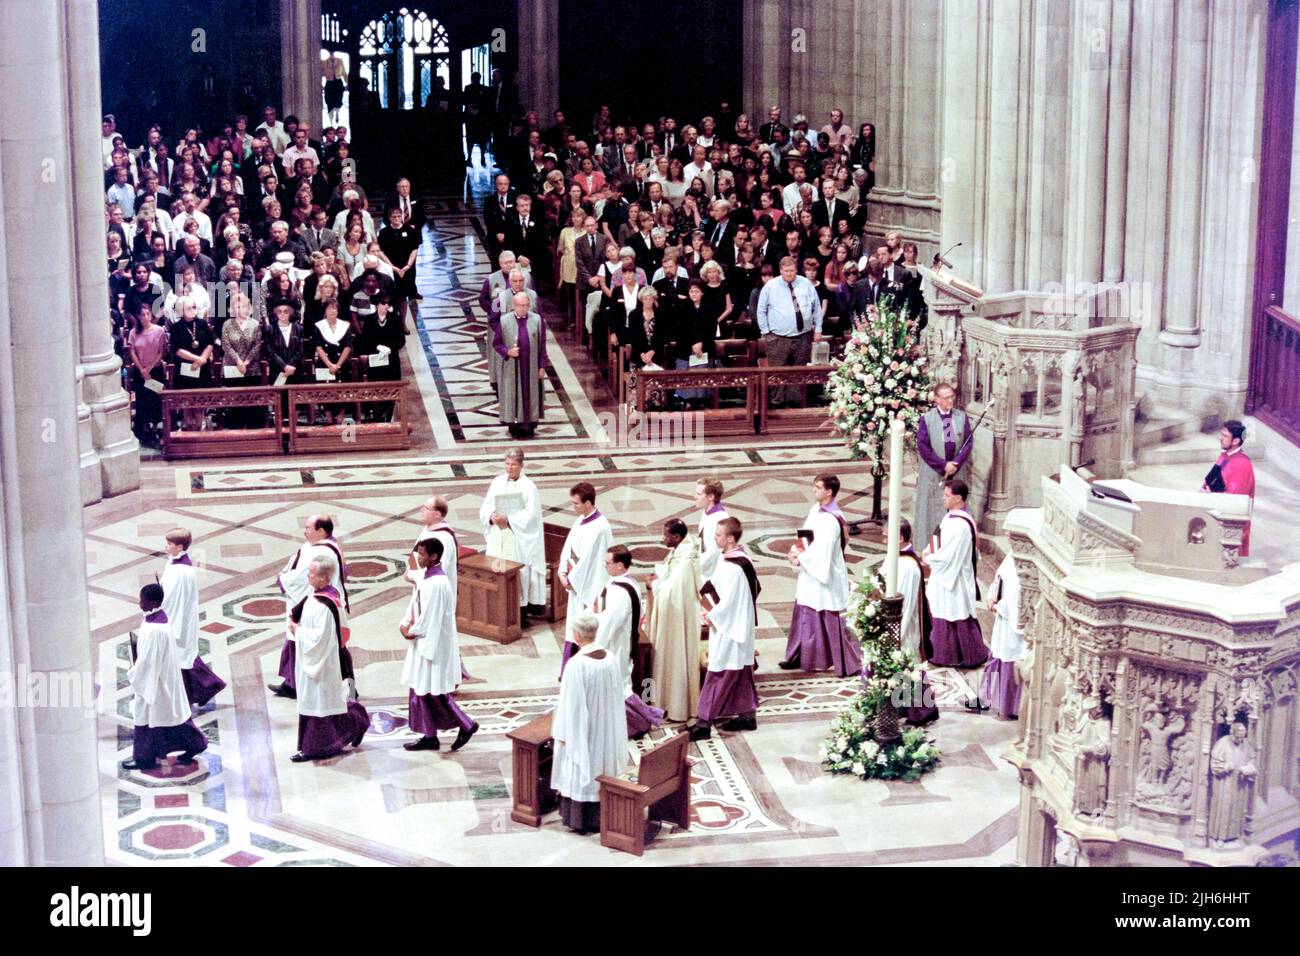 The Cathedral Choir of Men and Boys process into nave during a memorial and prayer service to Diana, the Princess of Wales, on the occasion of her death at the Washington National Cathedral, September 6, 1997, in Washington, D.C. Stock Photo